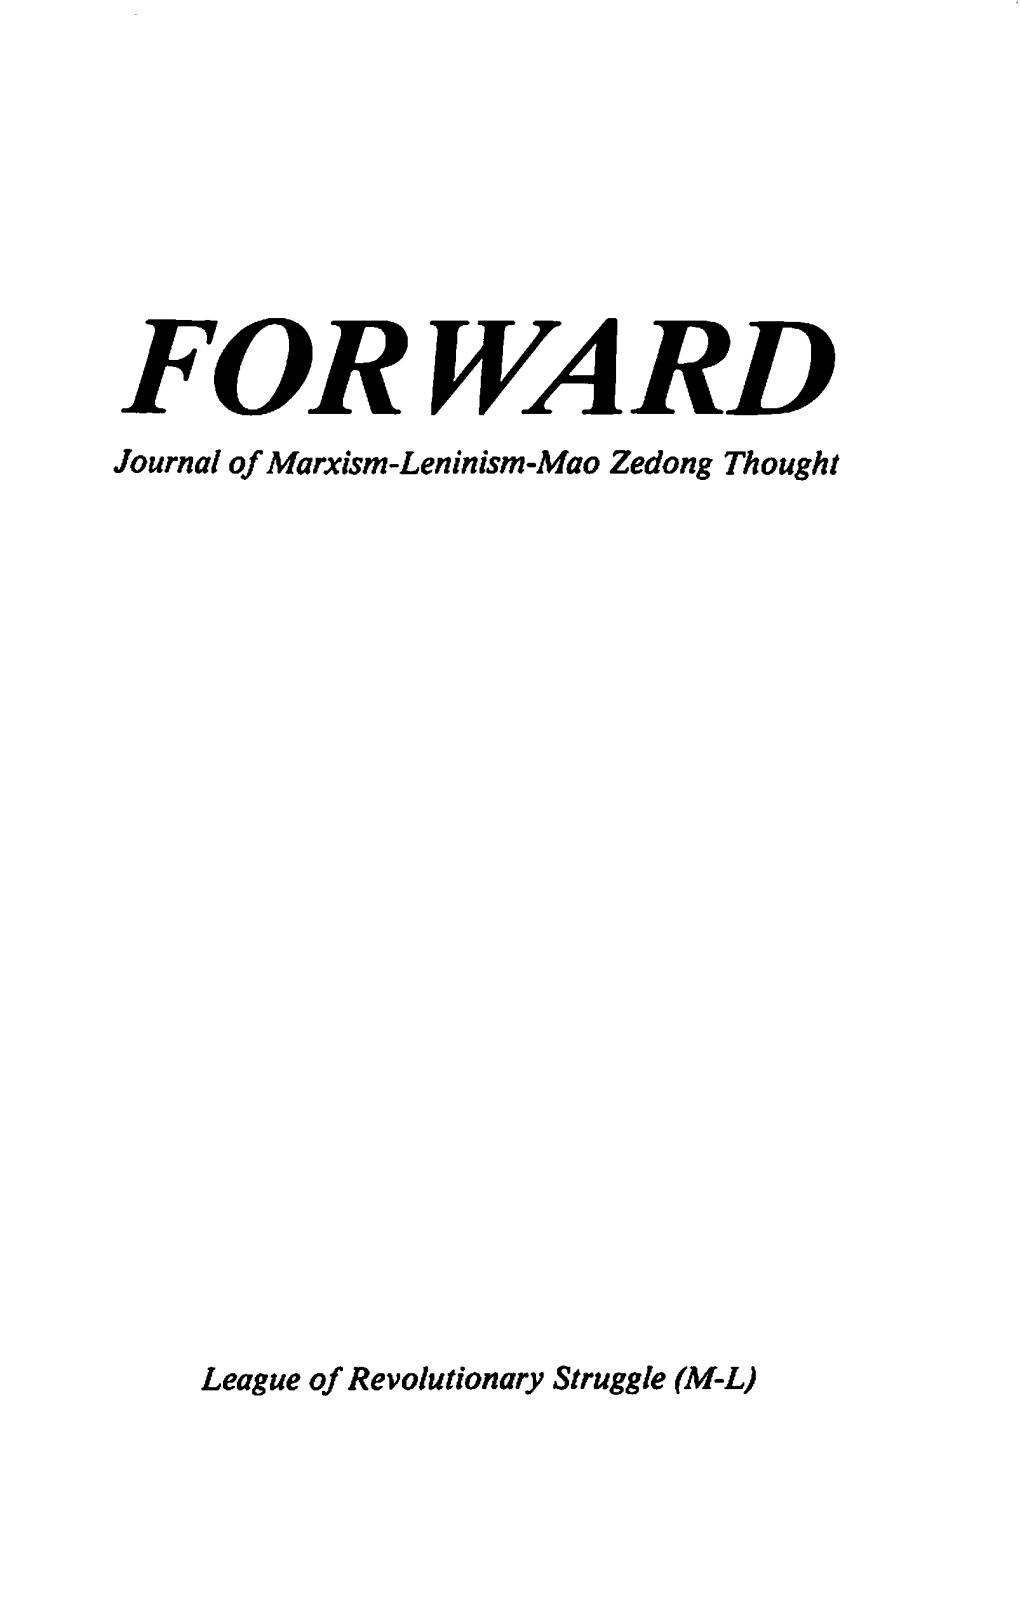 FOR WARD Journal of Marxism-Leninism-Mao Zedong Thought